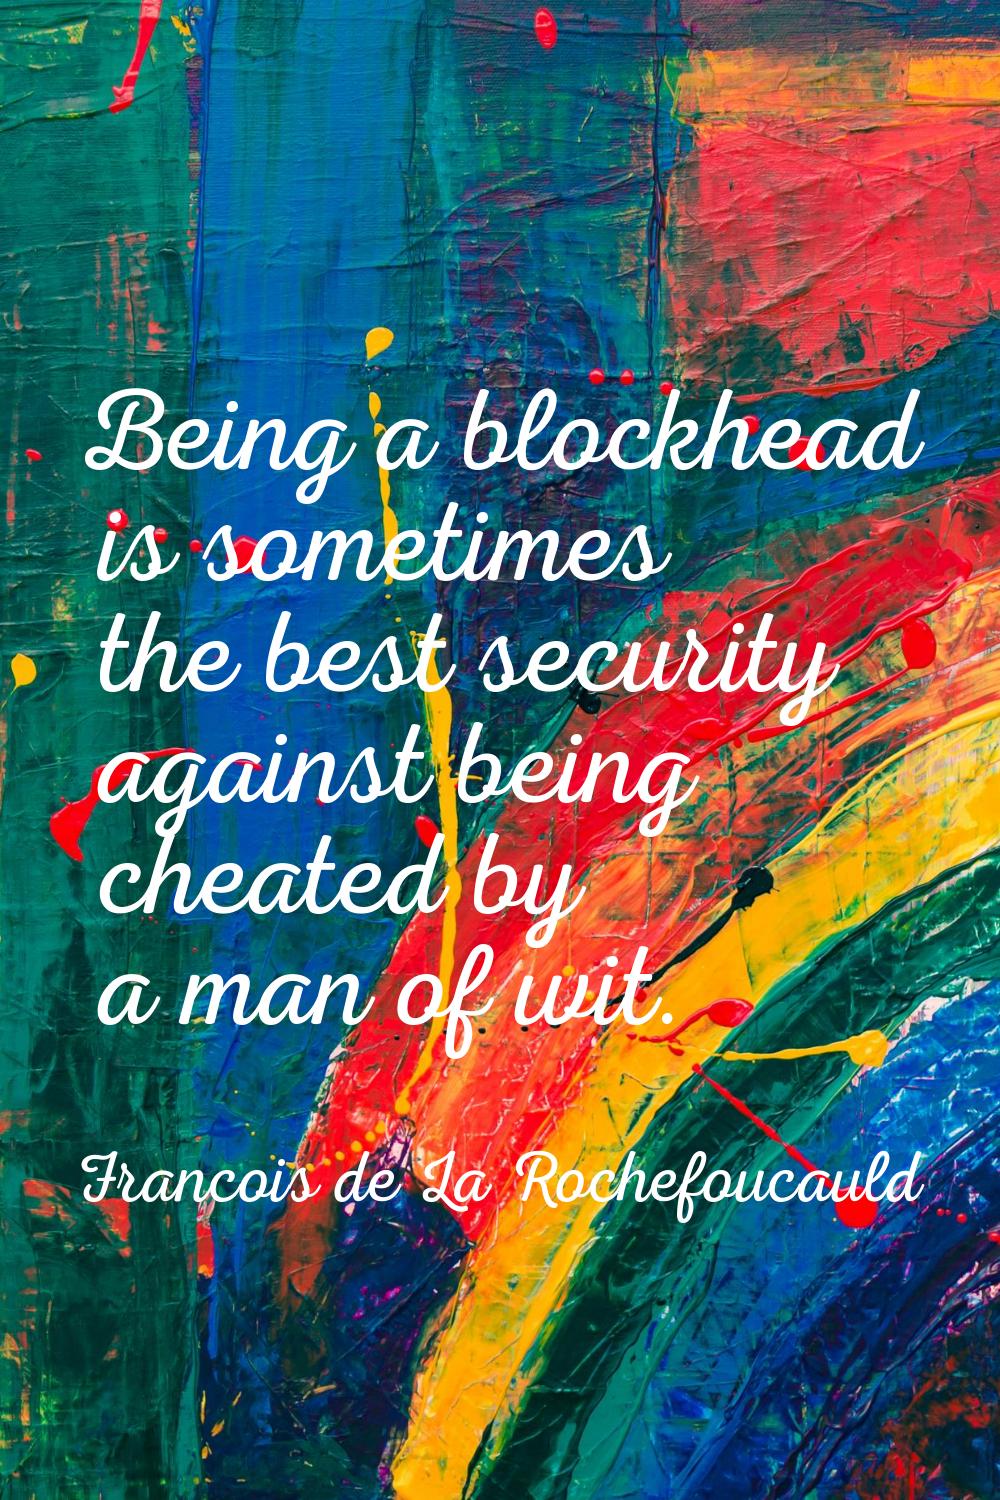 Being a blockhead is sometimes the best security against being cheated by a man of wit.